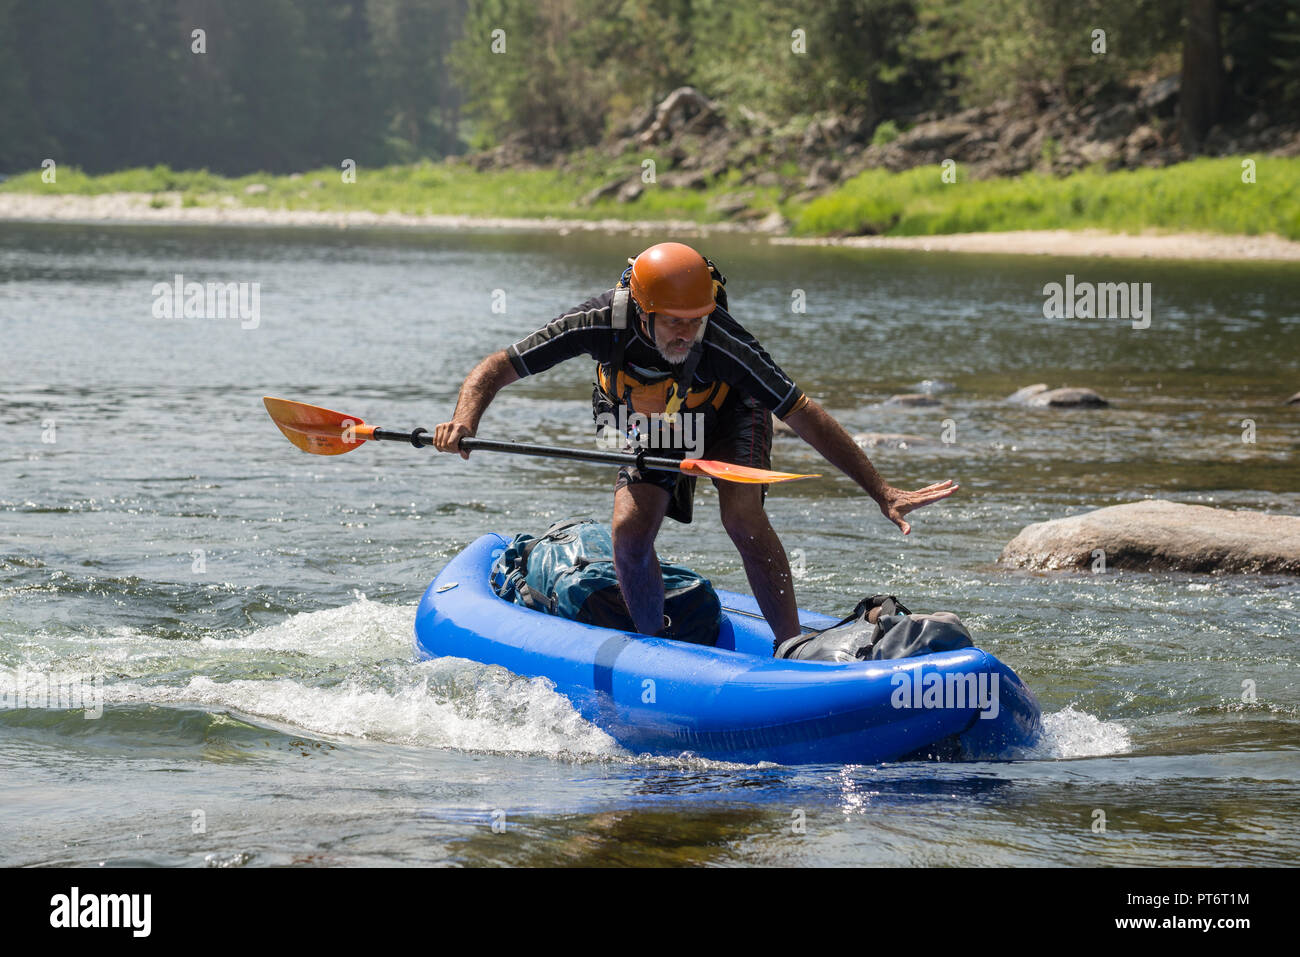 Surfing a wave in an inflatable kayak on Idaho's Selway River. Stock Photo